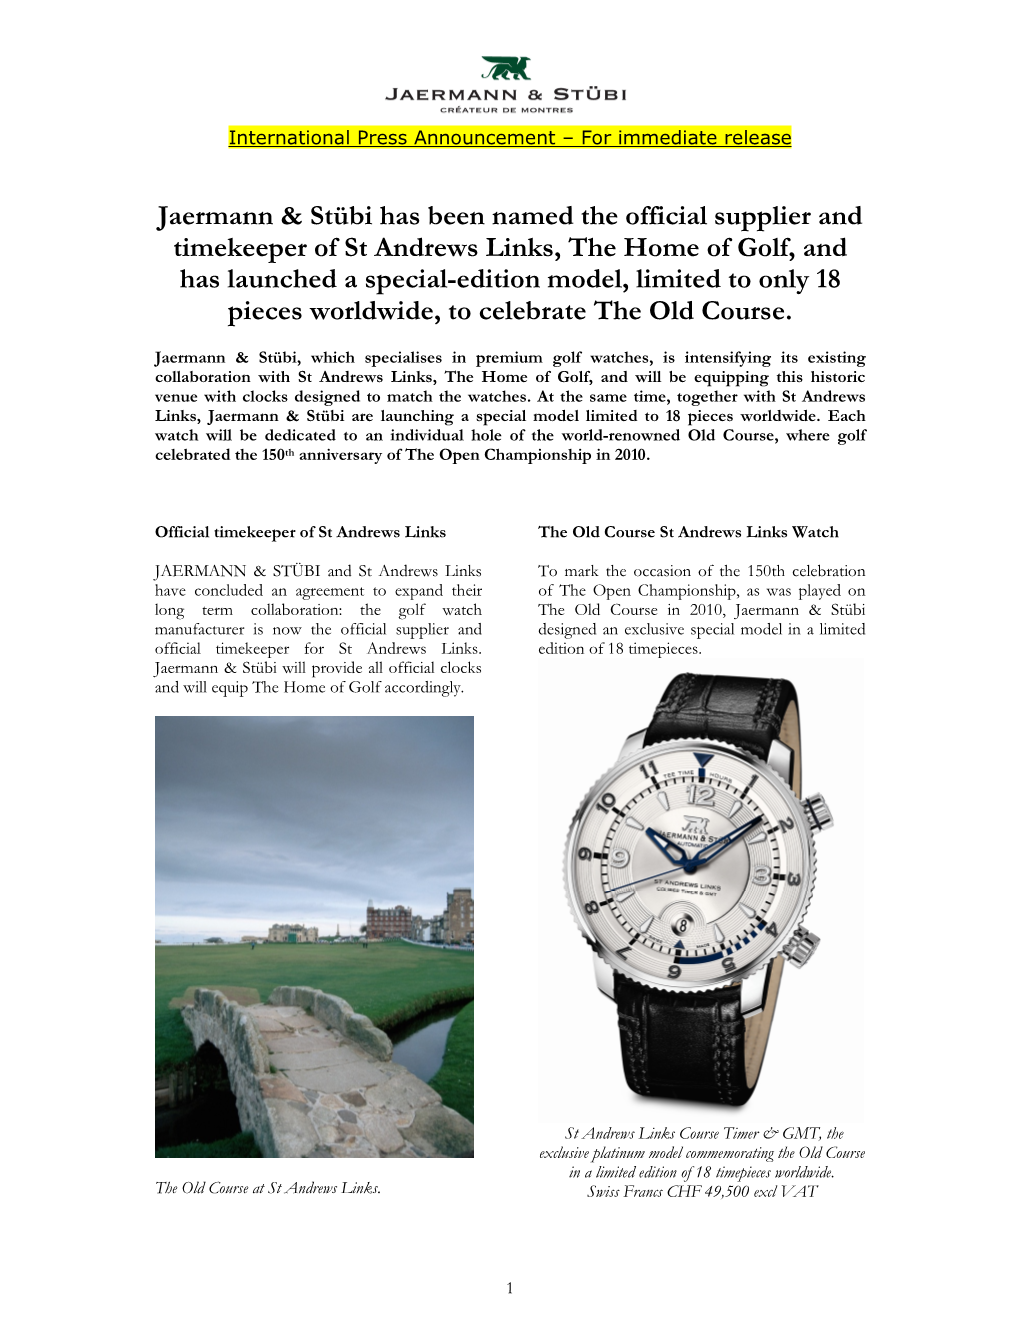 Jaermann & Stübi Has Been Named the Official Supplier and Timekeeper of St Andrews Links, the Home of Golf, and Has Launche